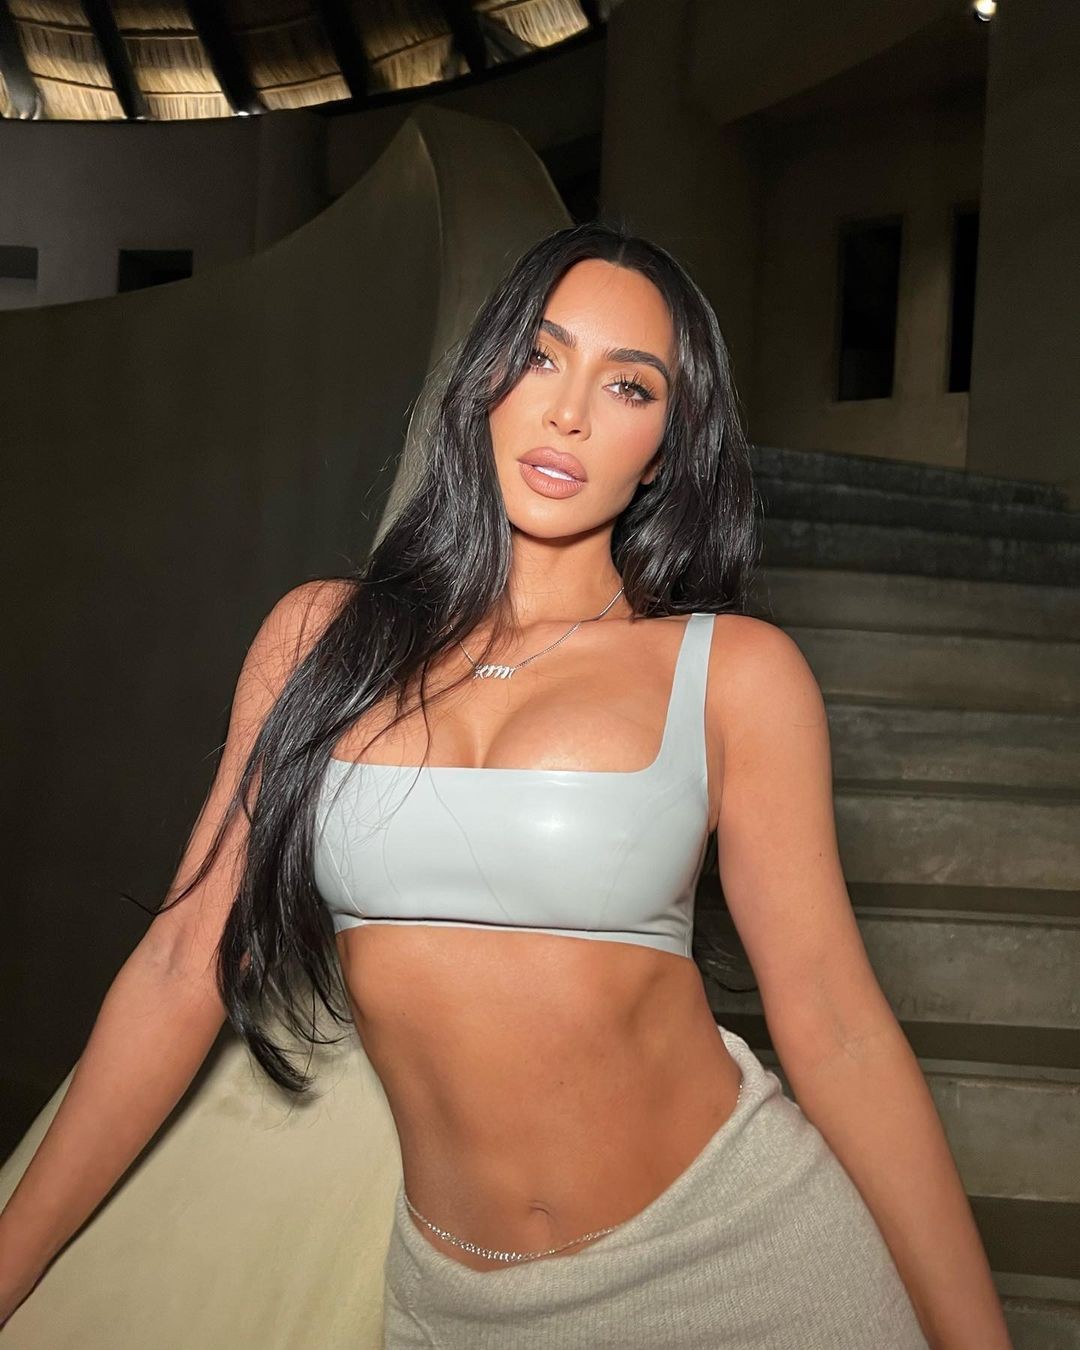 In a surprising turn of events, Kim Kardashian stole the spotlight by flaunting her ample cleavage in new selfies, sparking comparisons to Megan Fox. Despite missing the Oscar Party, the reality celebrity ensured she didn't miss out on the night's trend of showcasing her assets. See how Kim's daring display shook up Hollywood's hottest party!